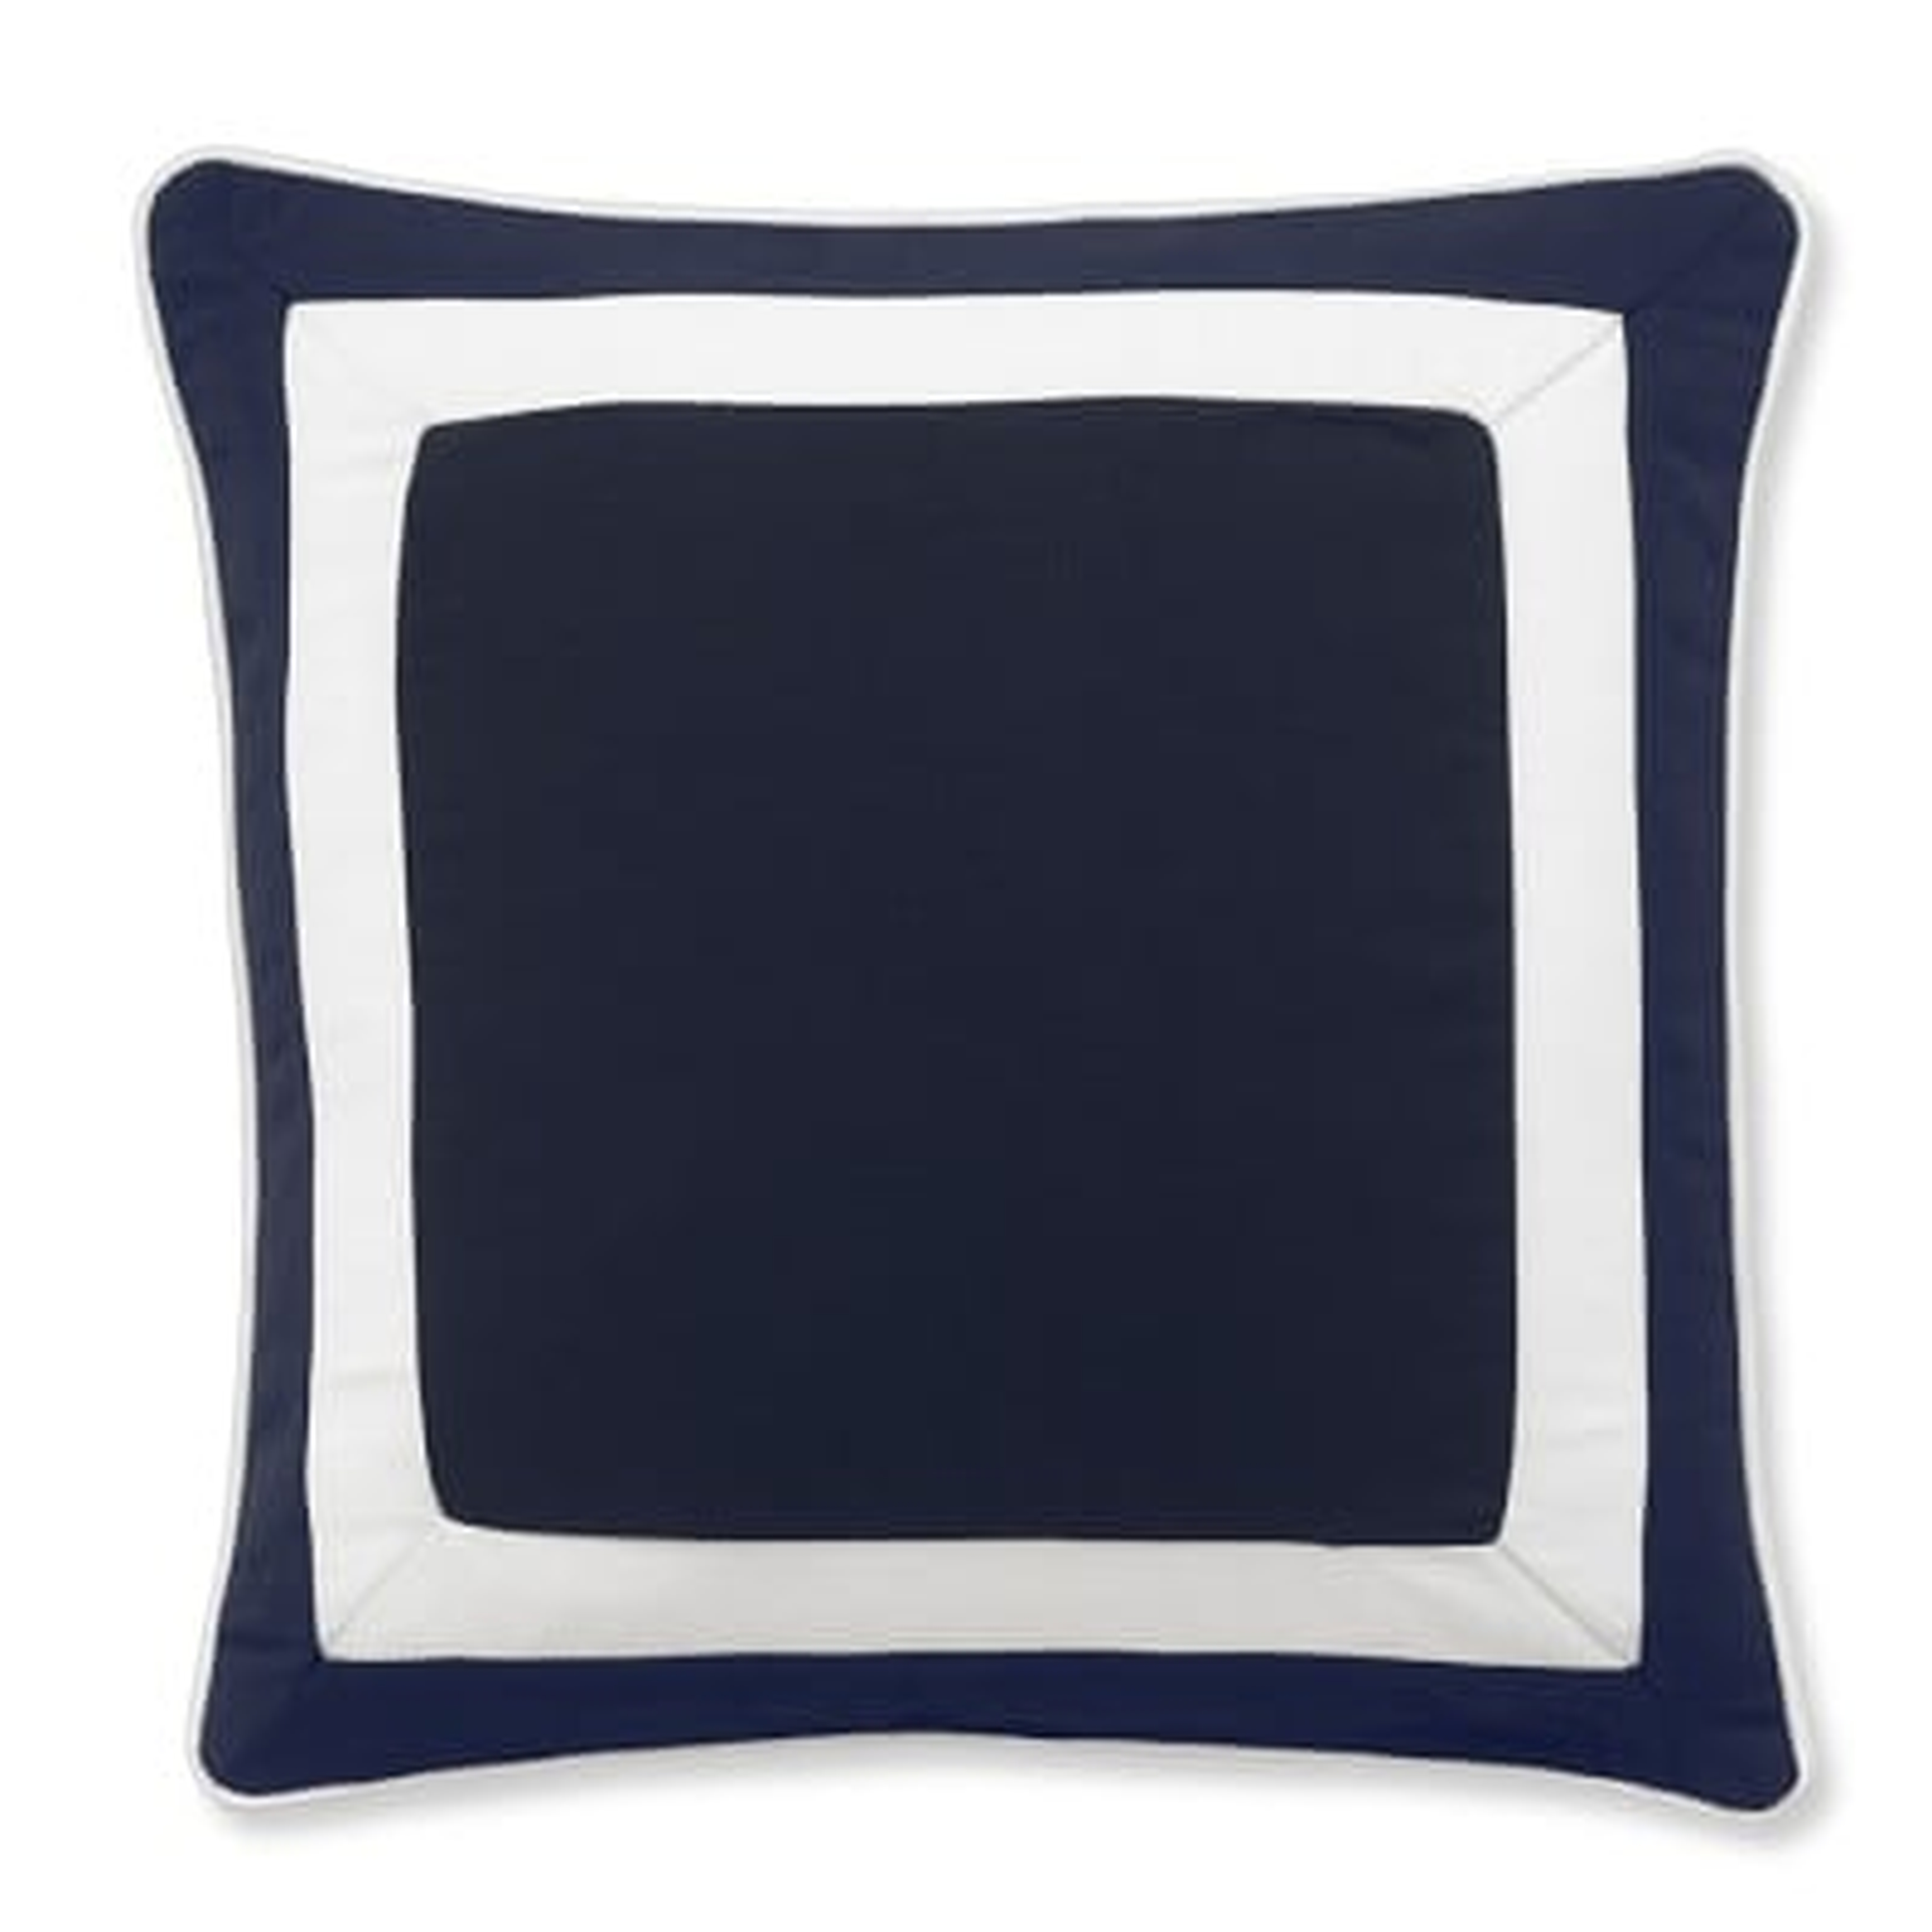 Sunbrella Outdoor Solid Pillow Cover with White Border, 20" X 20", Navy - Williams Sonoma